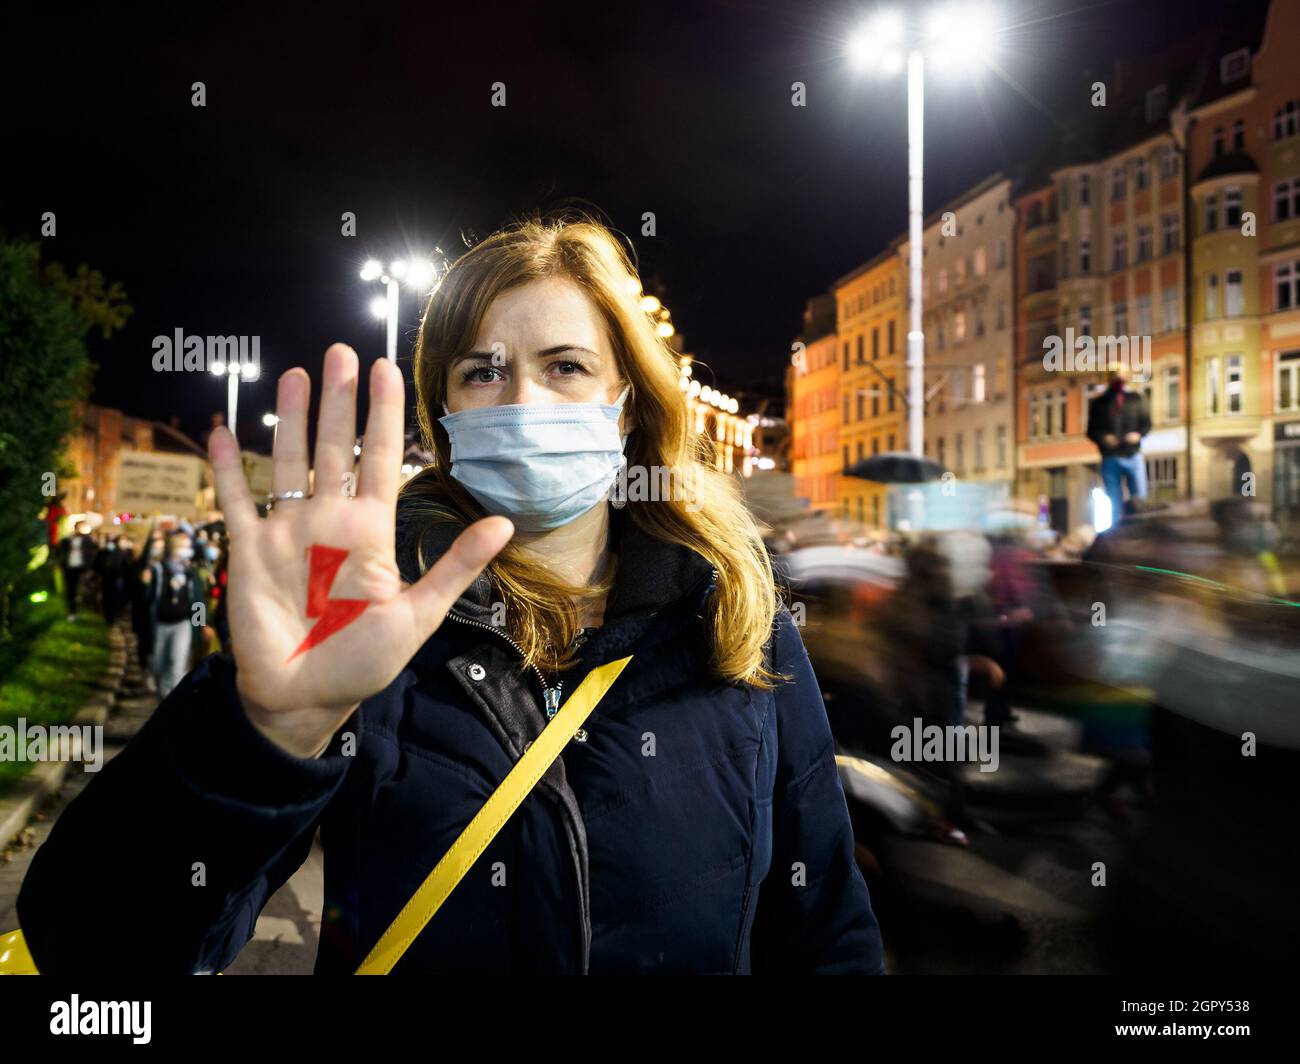 Woman Has Drawn A Sign Lightning On Hand. Women Protest Against Tightening Of Abortion Law. Poland. Stock Photo